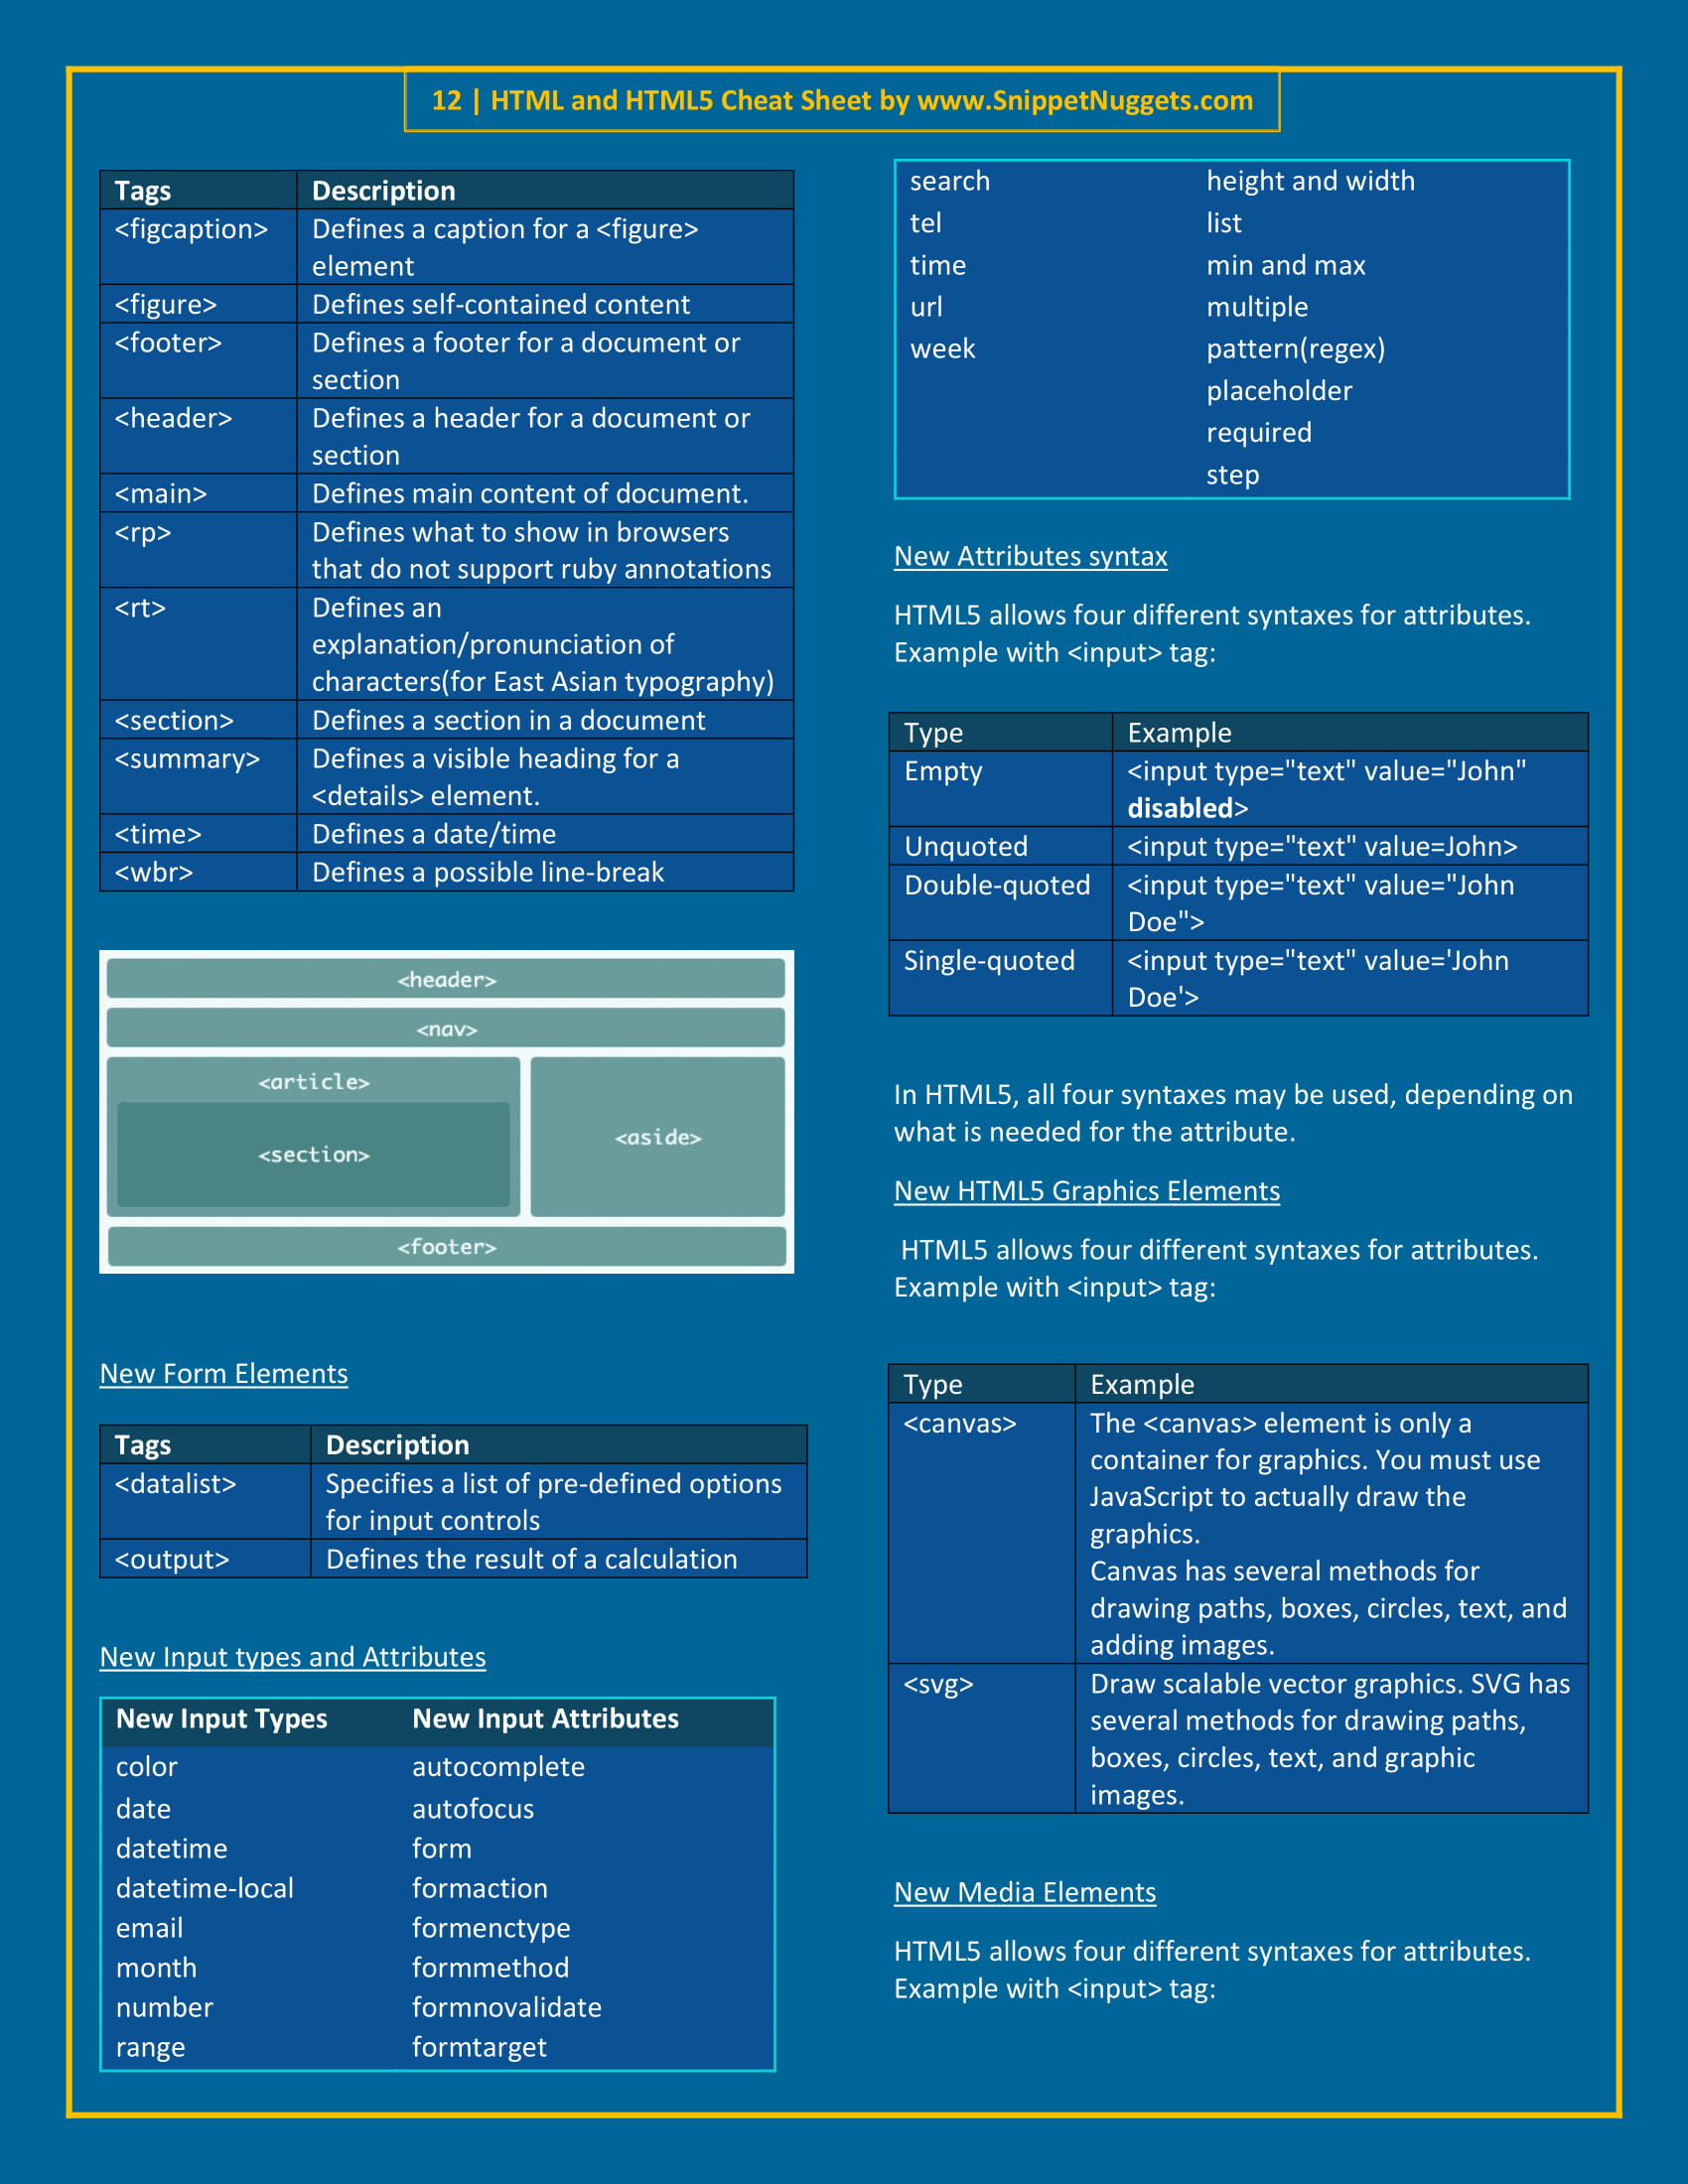 html cheat sheet for 2019 html5 new tag new form input types attributes graphic www.snippetnuggets.com